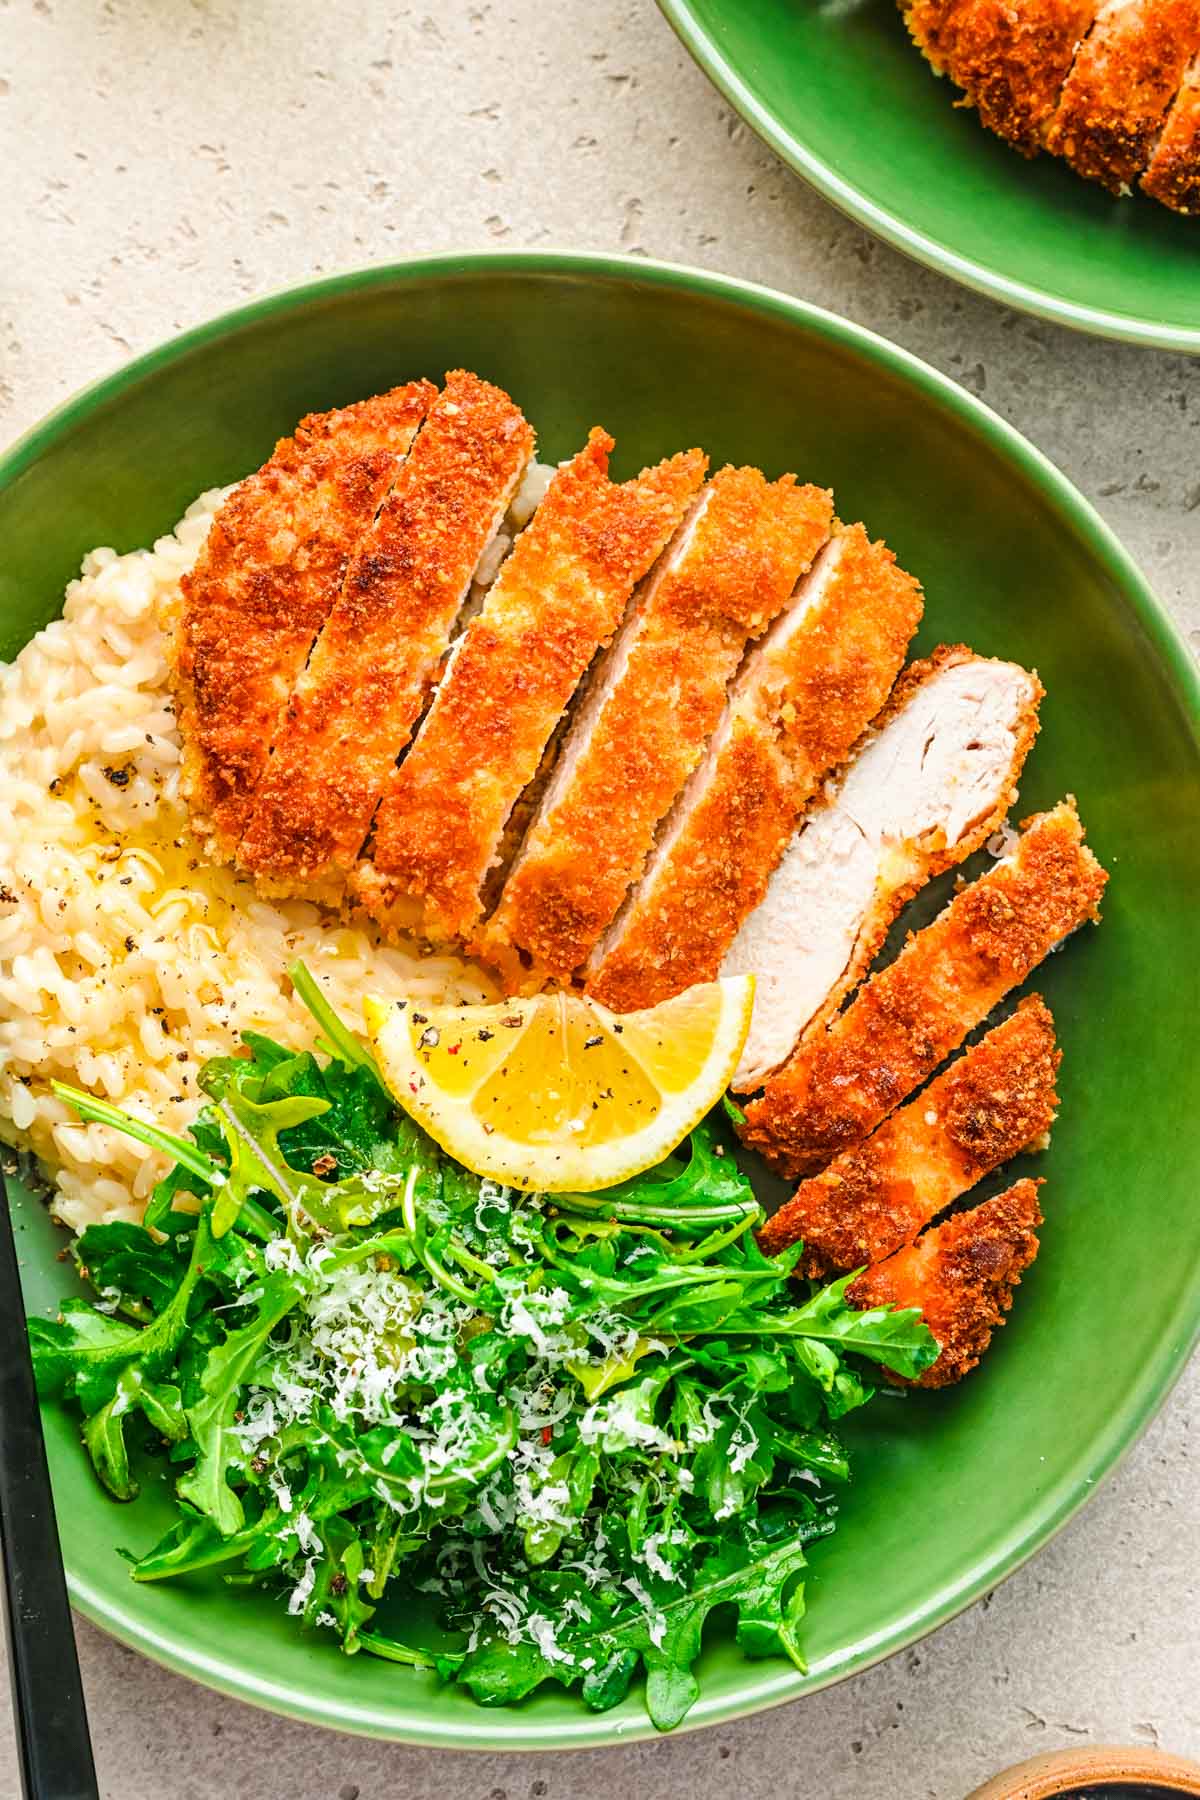 Overhead photo of panko breaded chicken in a green bowl with rice and greens.